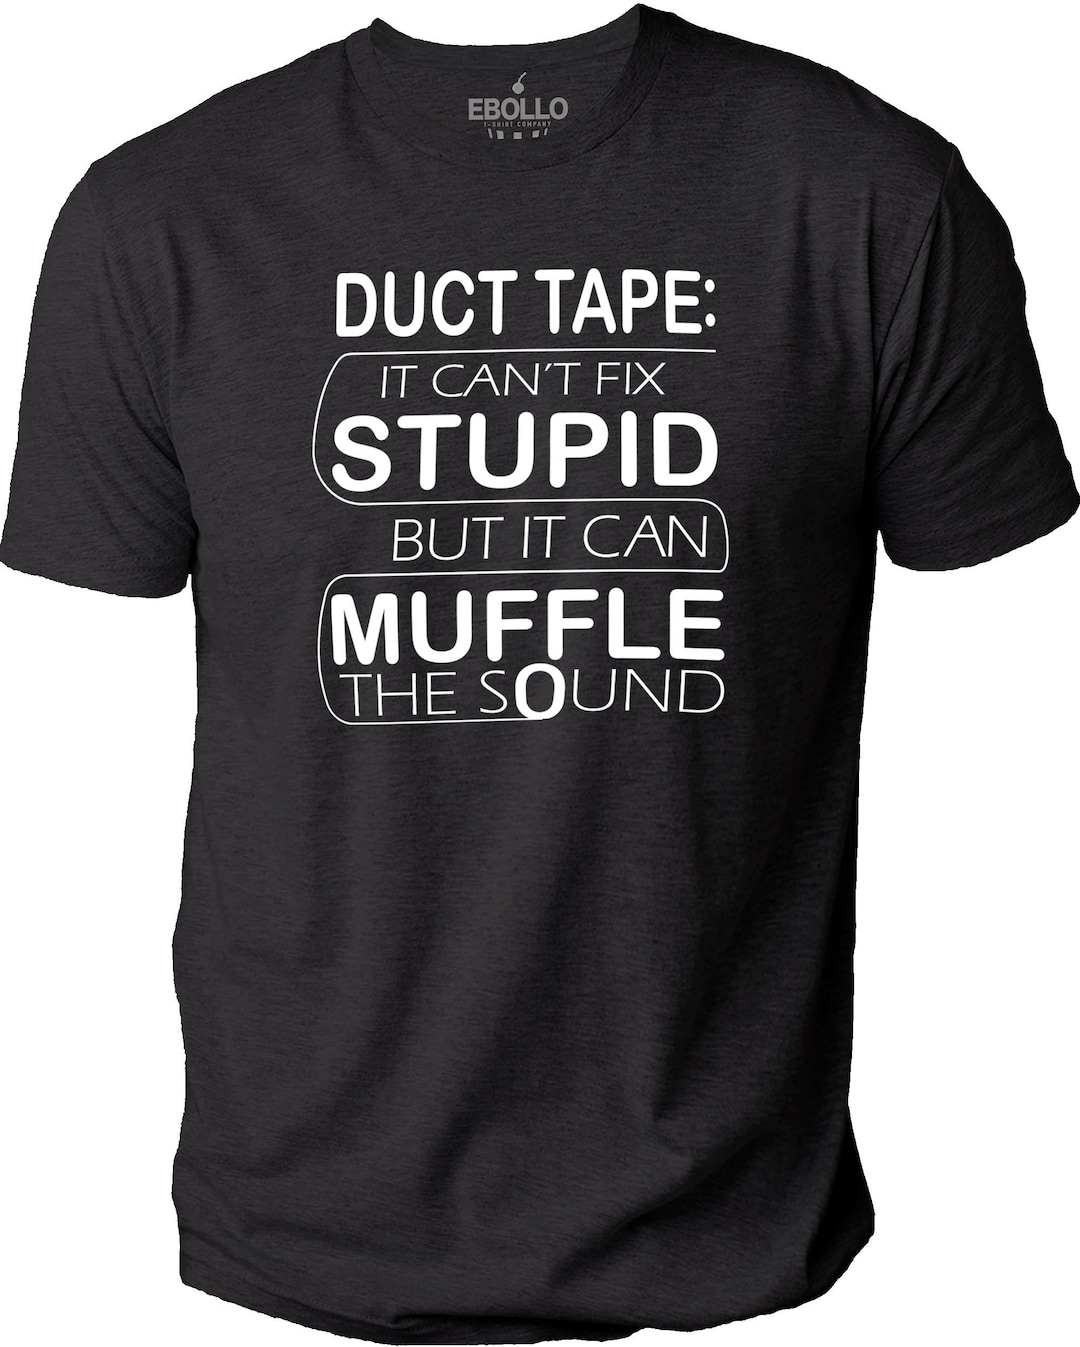 Duct Tape It Can't Fix Stupid but It Can Muffle the Sound T-shirt ...